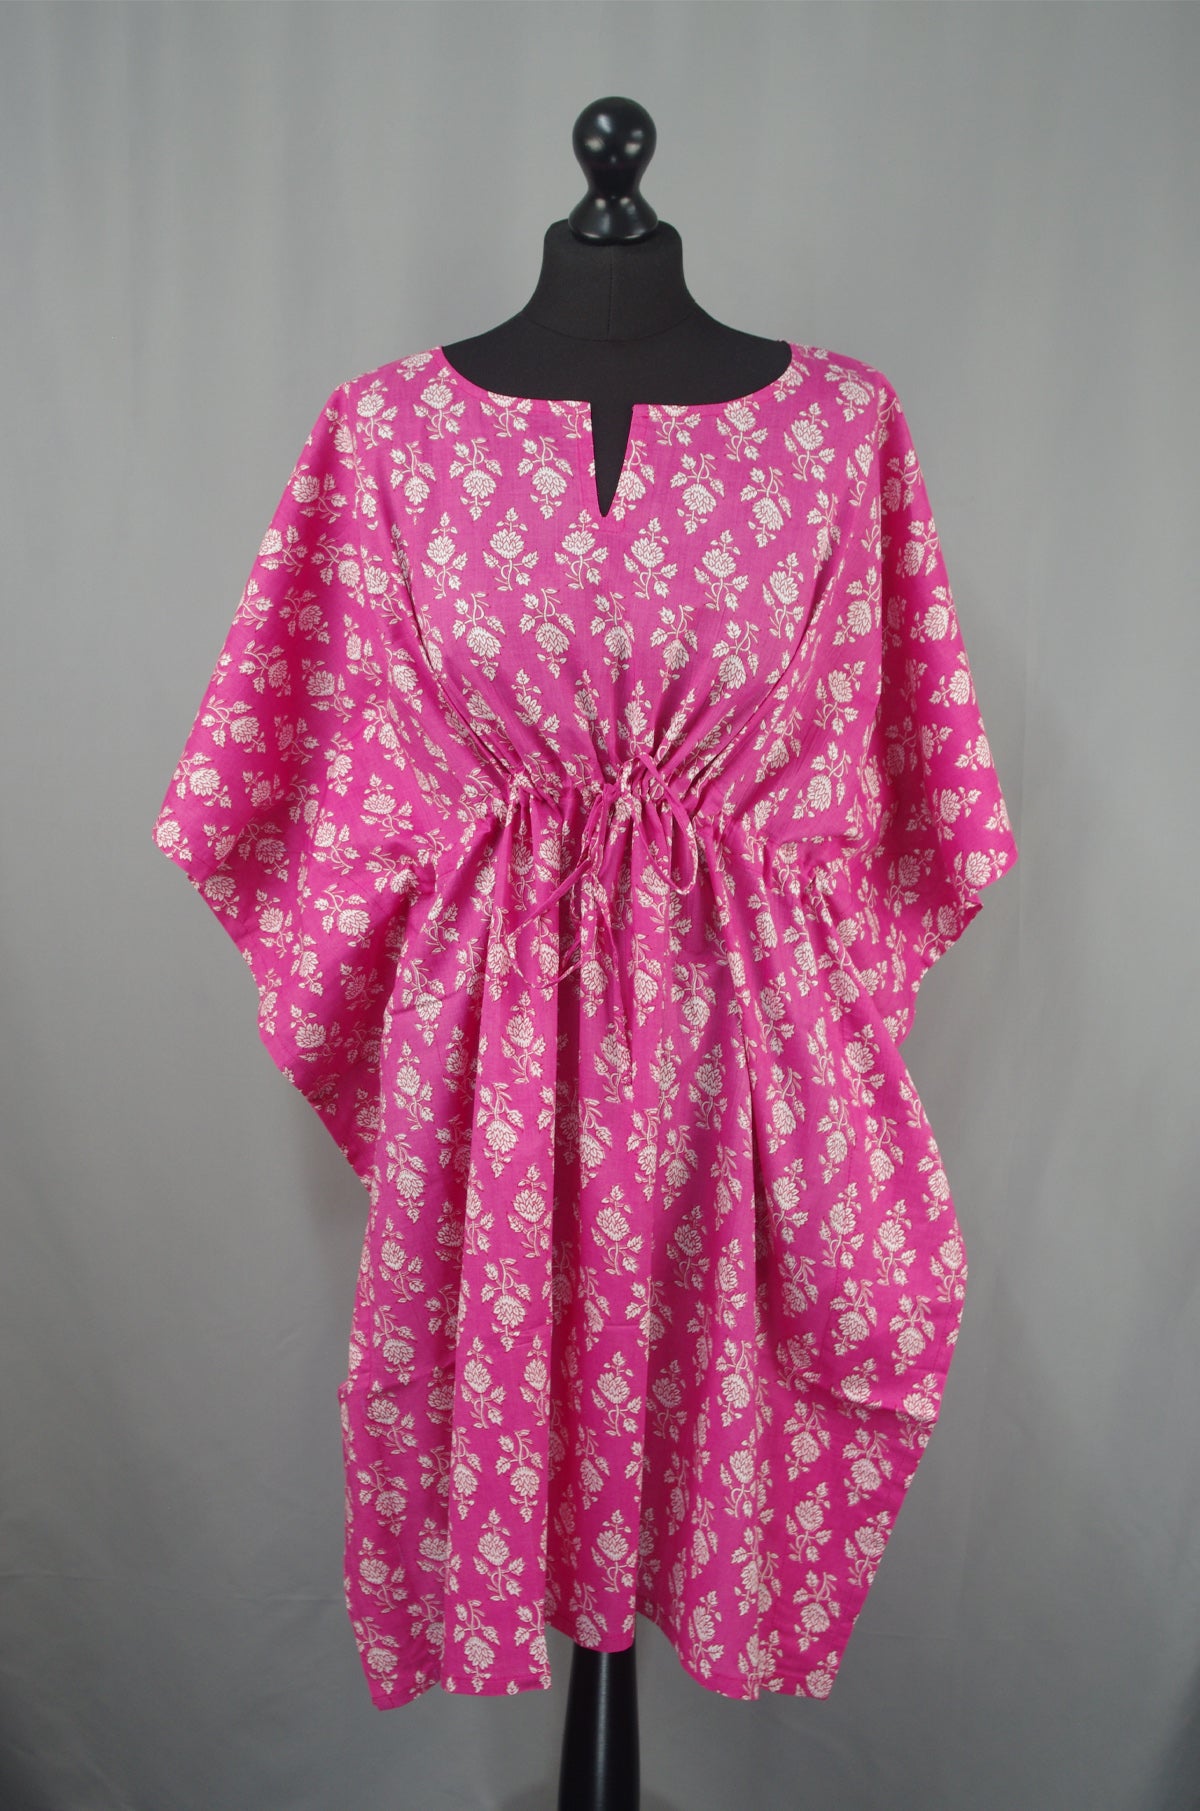 Block Printed Cotton Coverup / Kaftans - Pink Floral